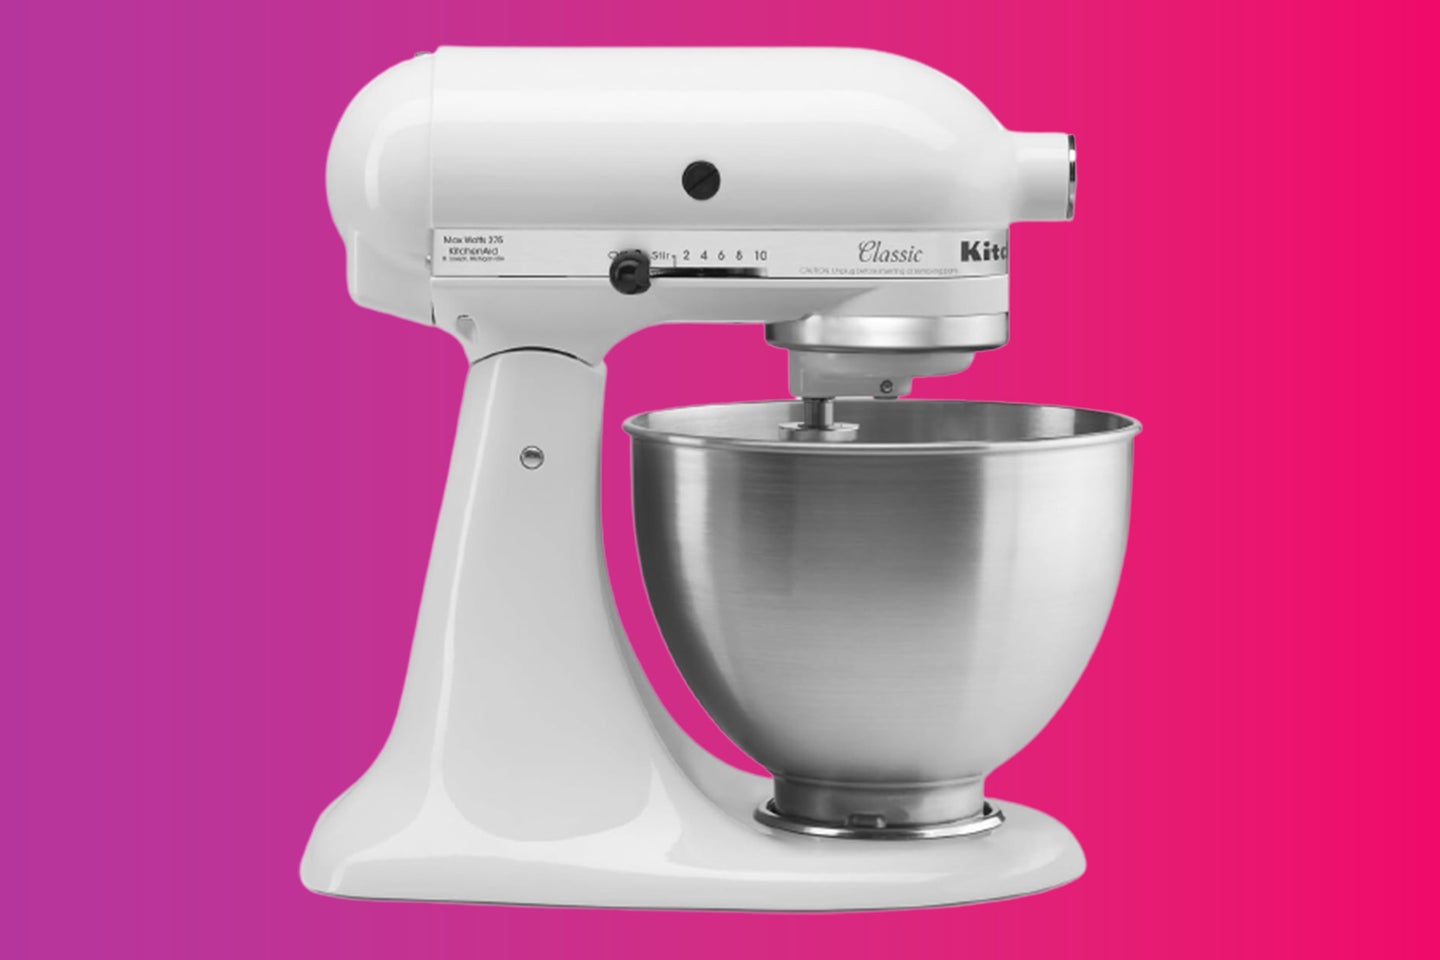 Save 15% on a KitchenAid stand mixer at  for fall baking and cooking